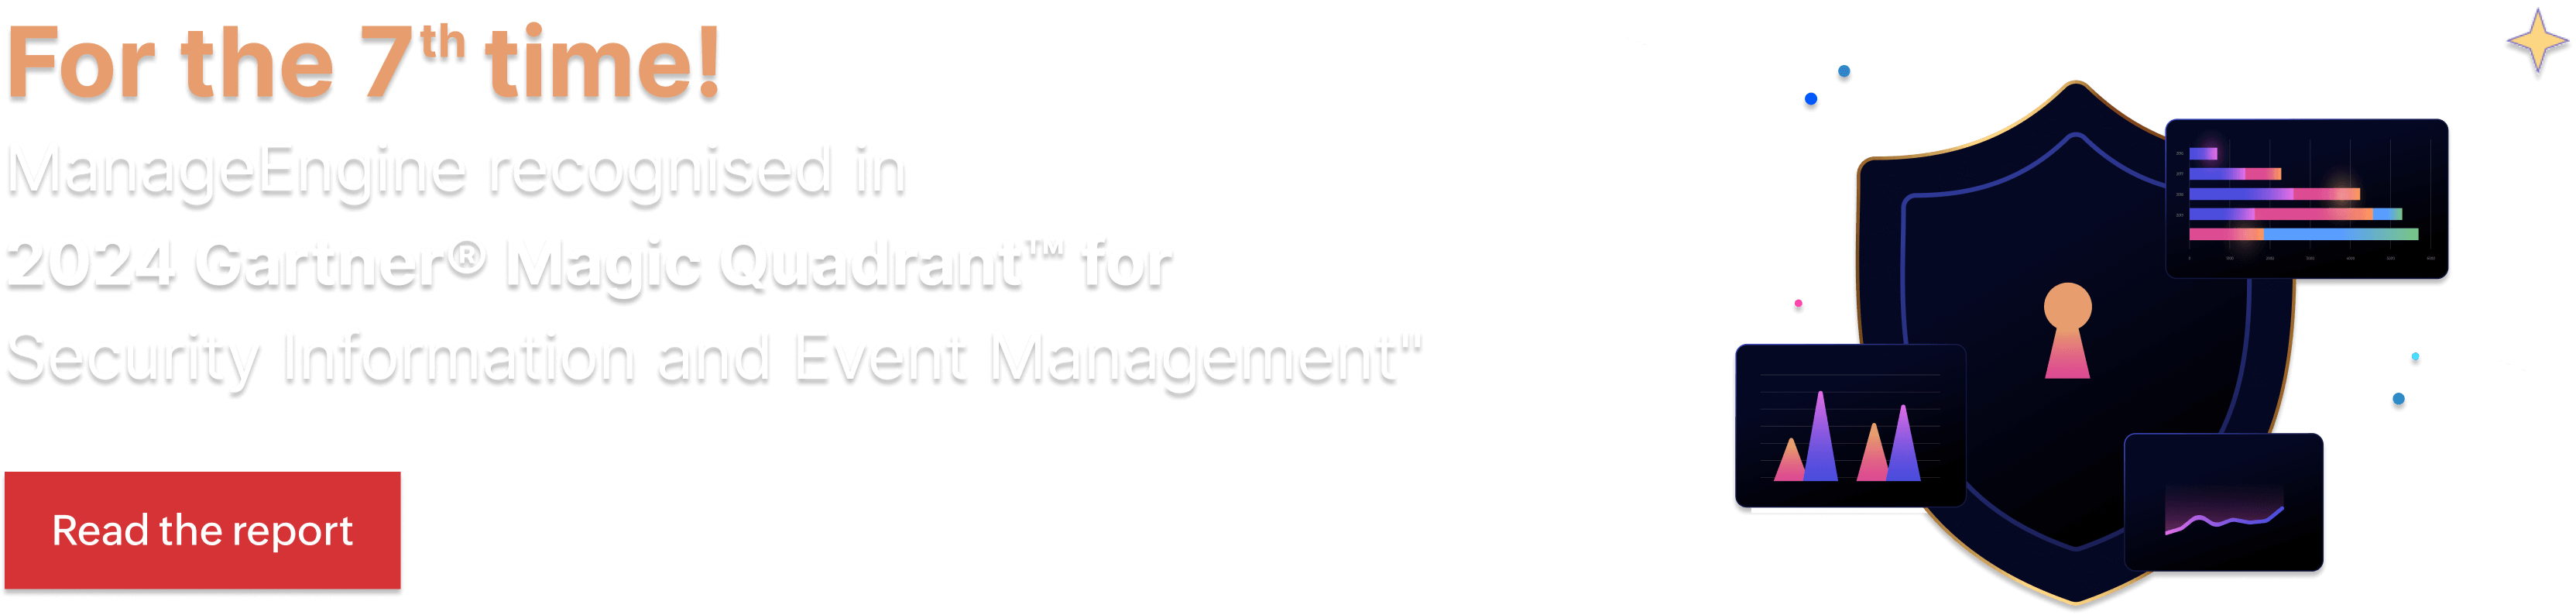 For the 7 time! ManageEngine recognised in
                            2024 Gartner® Magic Quadrant™ for Security Information and Event Management